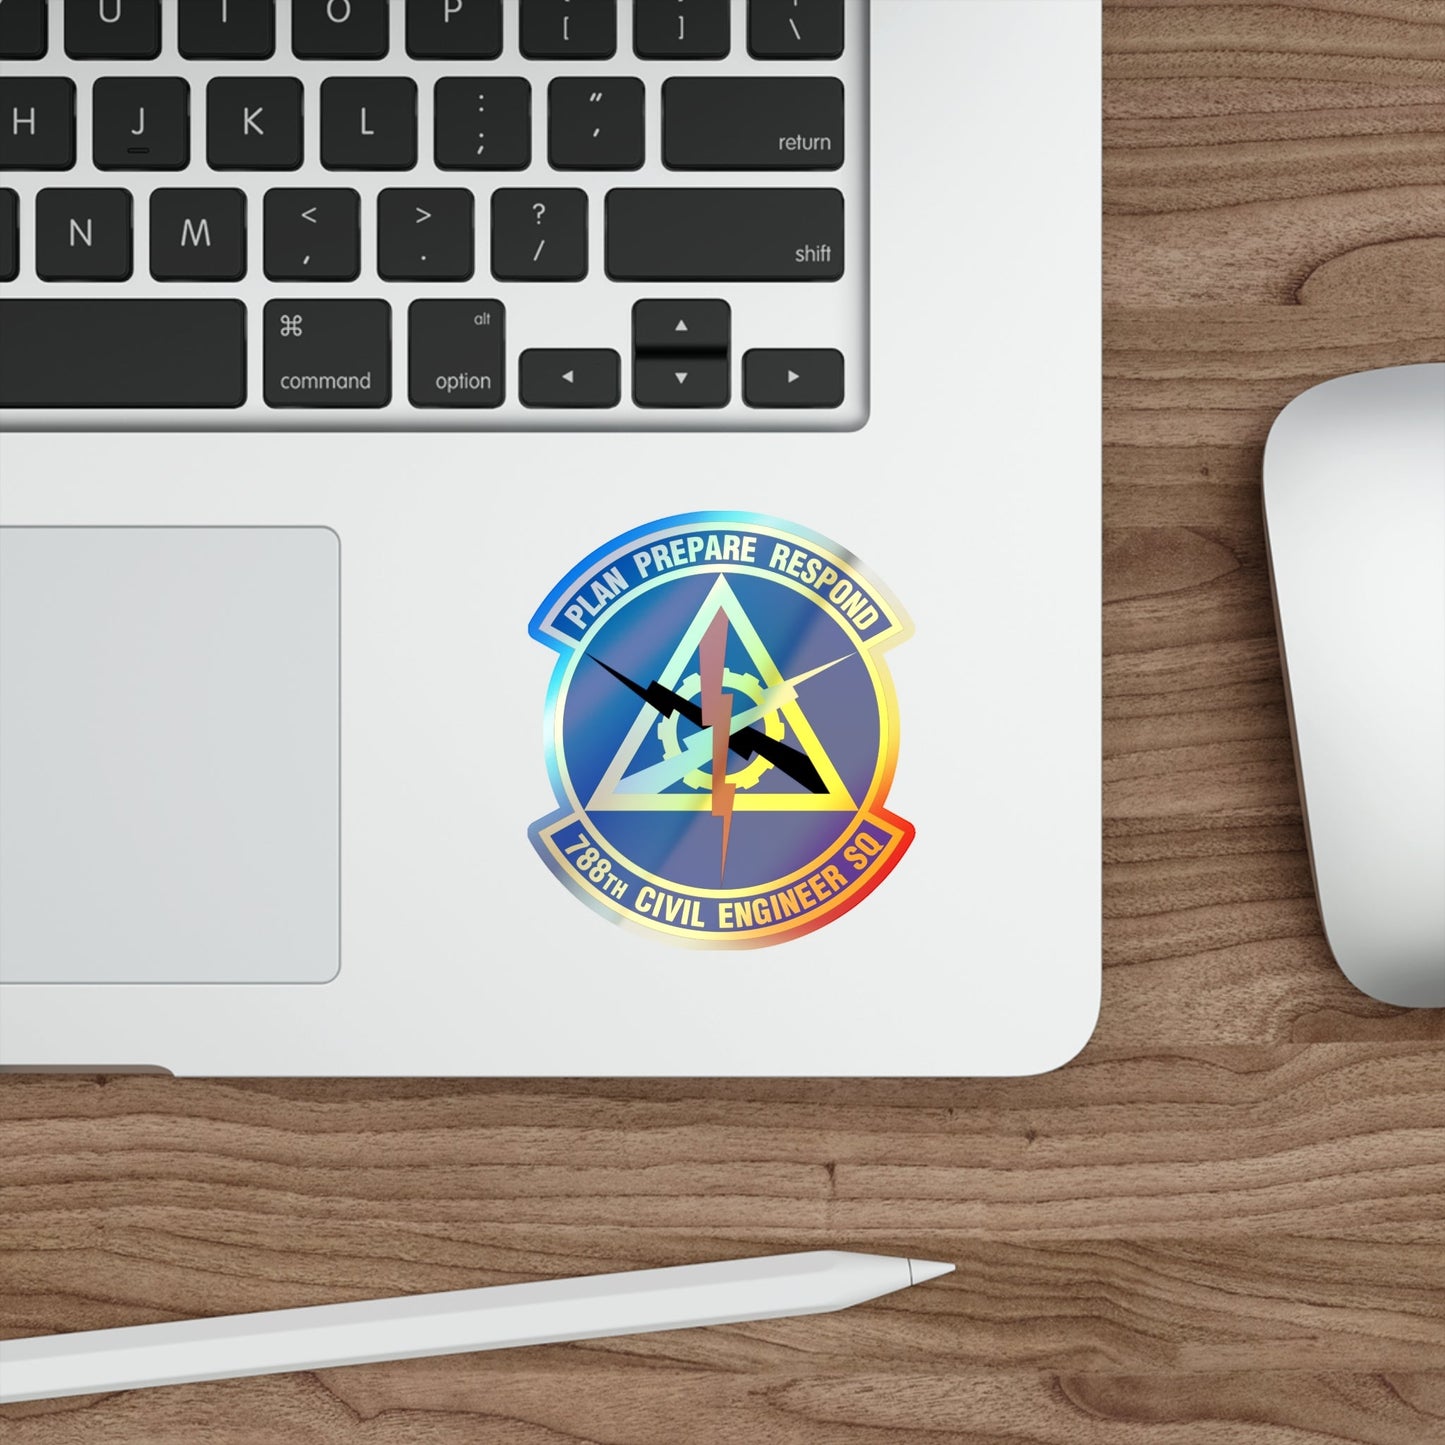 788 Civil Engineer Squadron AFMC (U.S. Air Force) Holographic STICKER Die-Cut Vinyl Decal-The Sticker Space